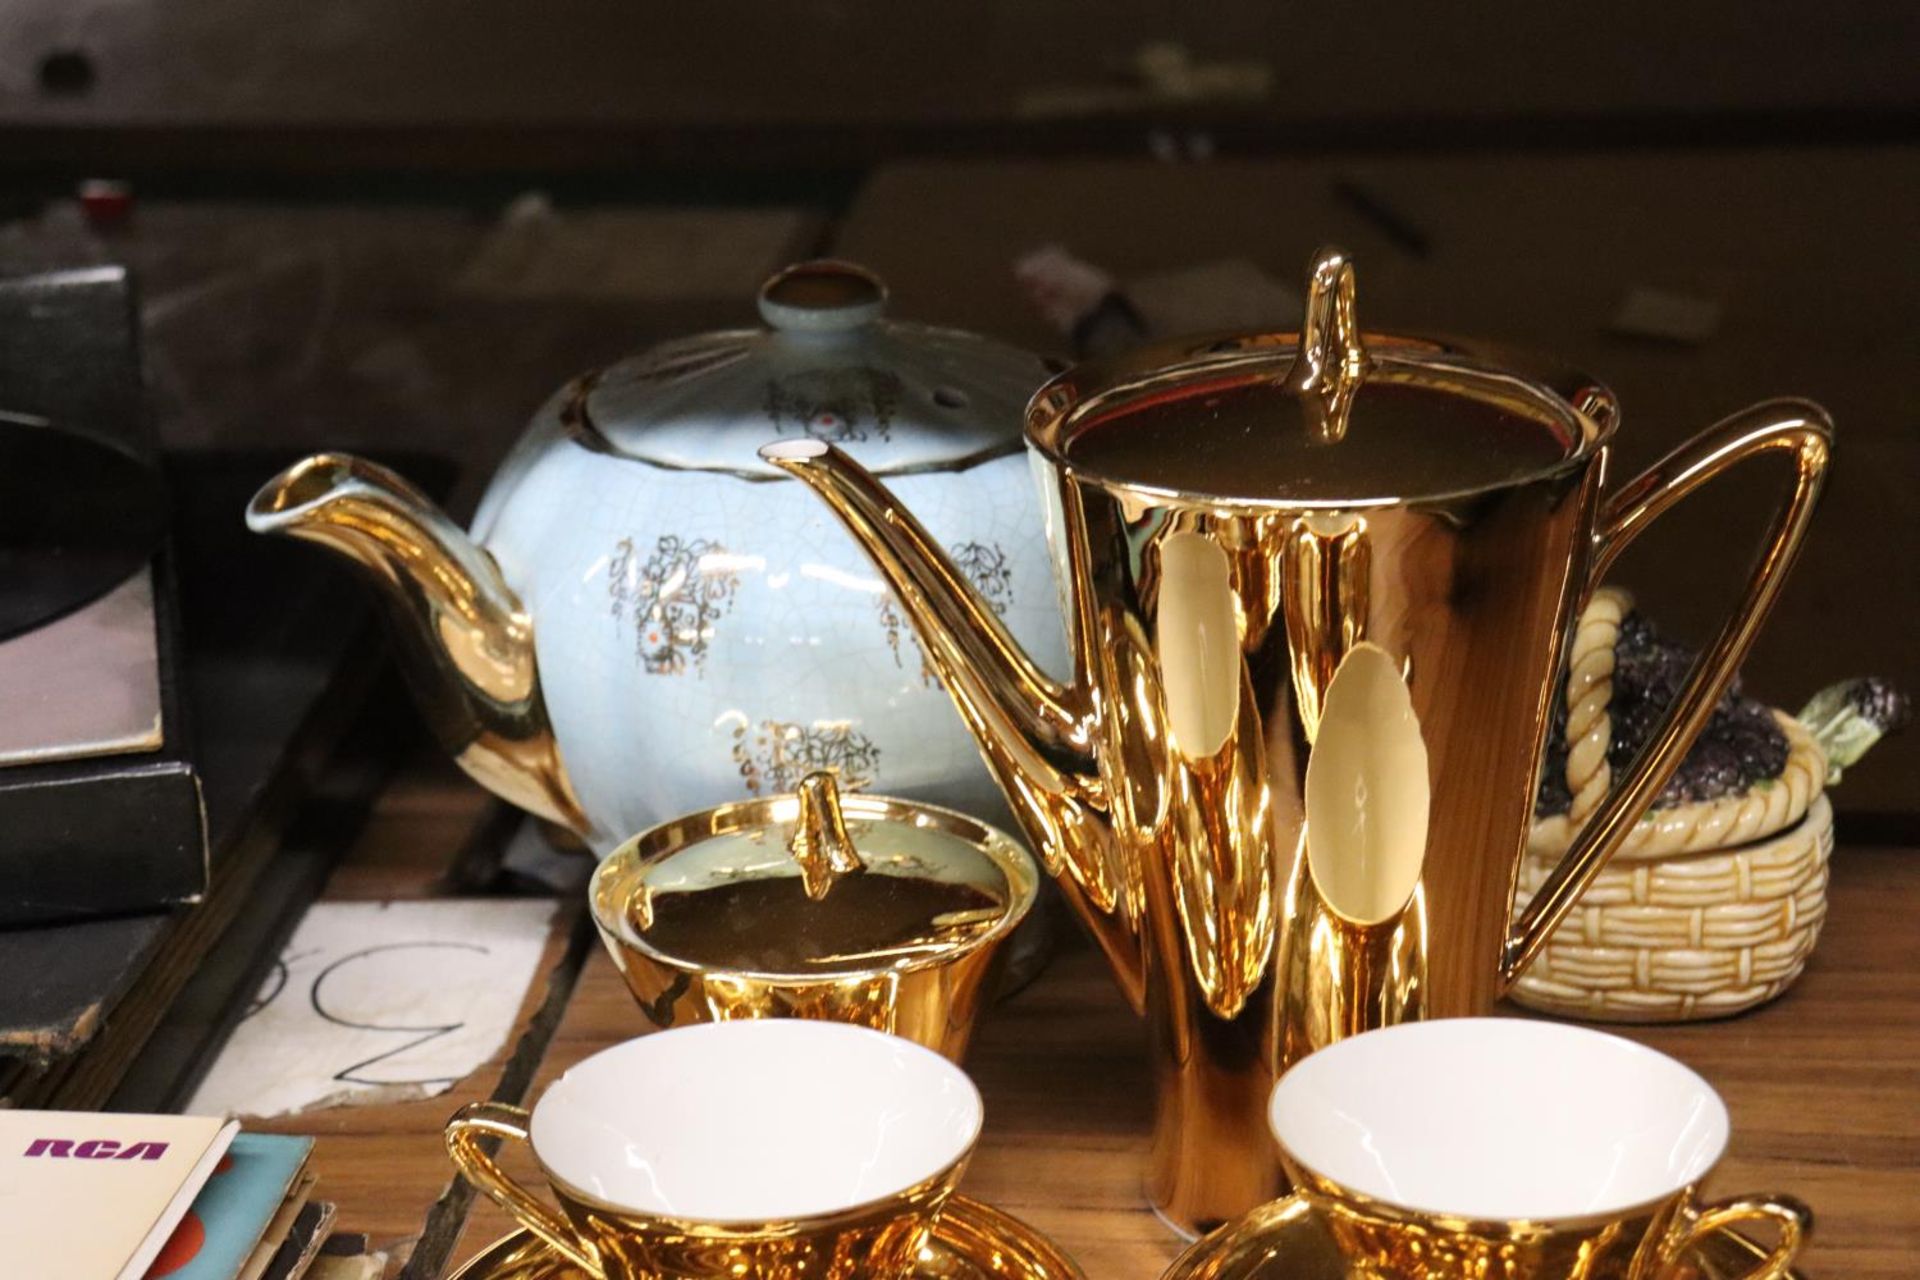 A GILT COLOURED COFFEE POT, SUGAR BOWL, CUPS AND SAUCERS, PLUS A VINTAGE SUDLOW'S TEAPOT AND A - Image 3 of 5